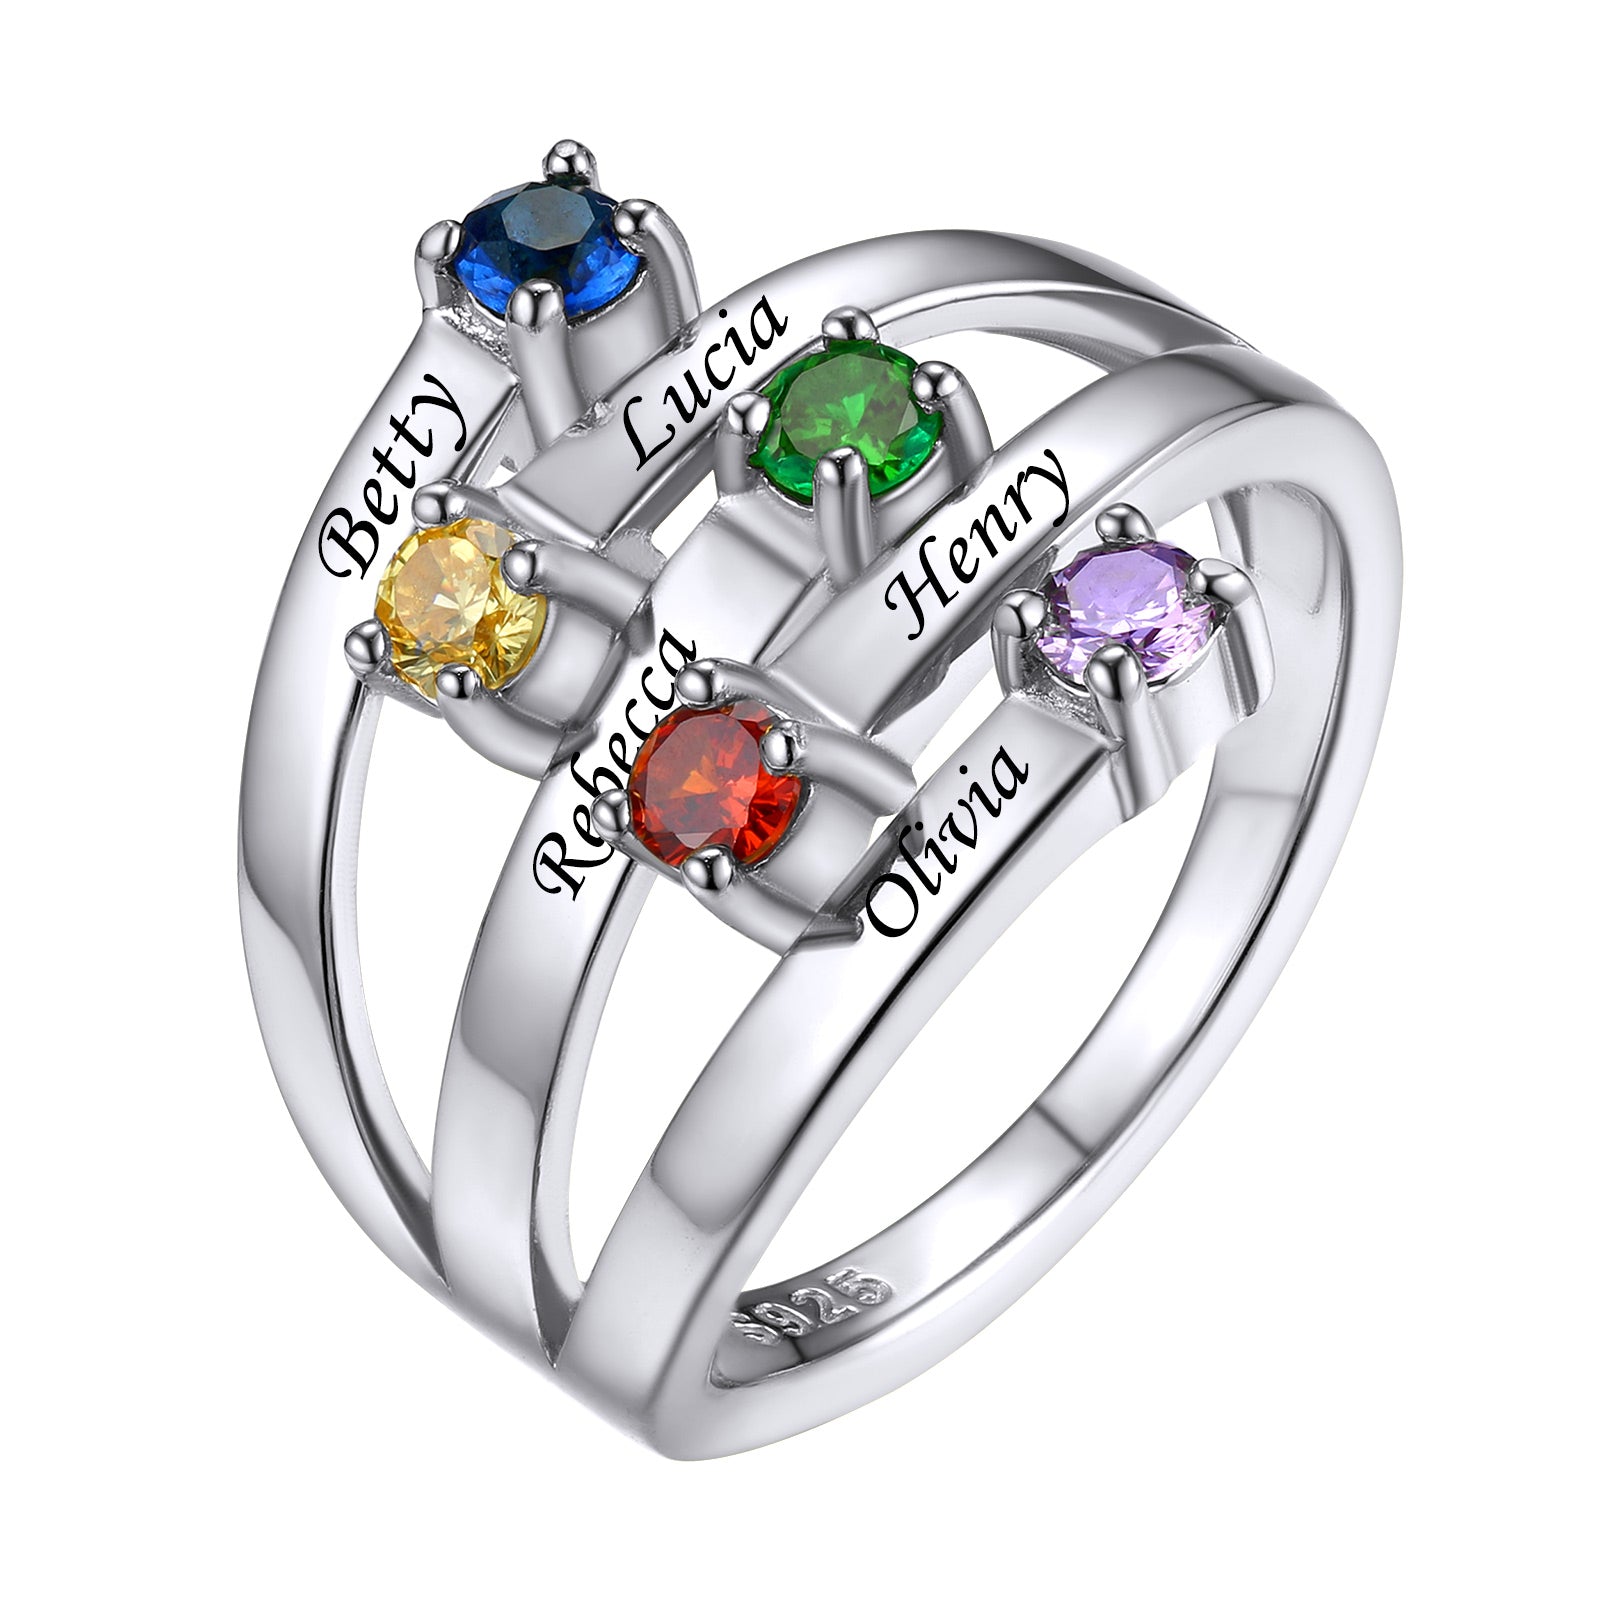 Adjustable Sterling Silver Personalized Birthstone Ring 5 stone